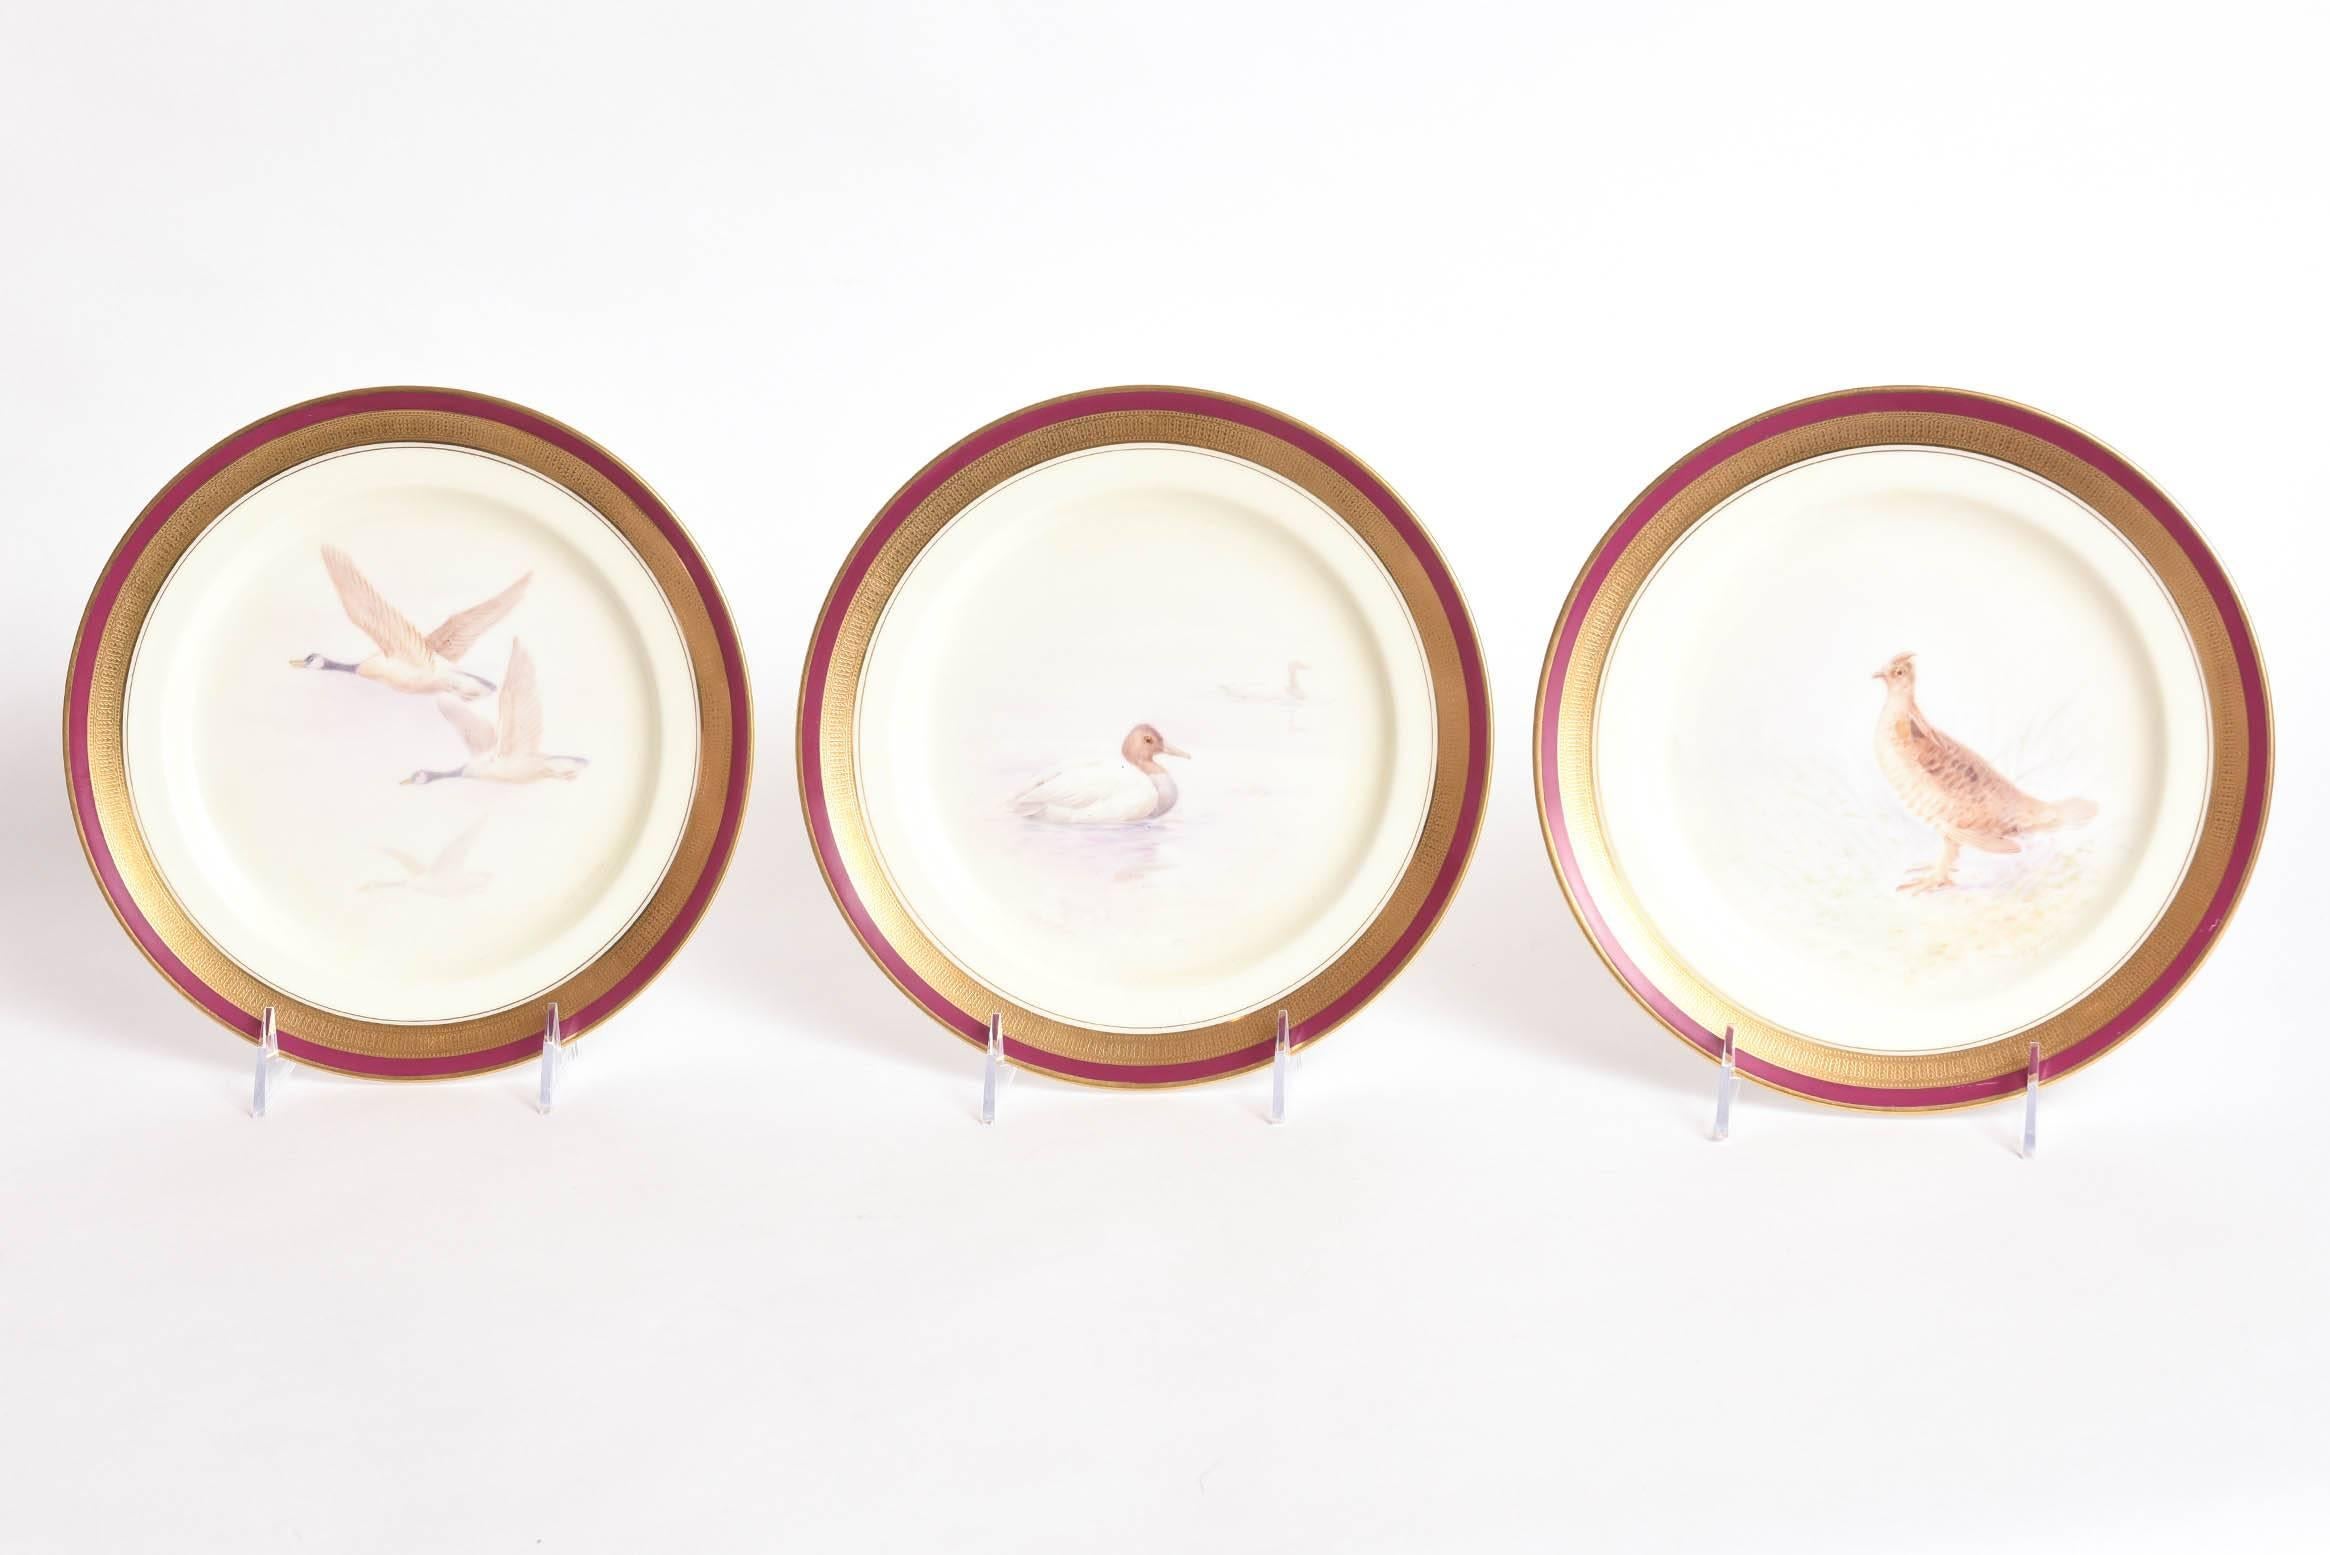 12 Game Bird Plates, Hand-Painted & Artist Signed. Rare Ruby Red Border, Antique 2